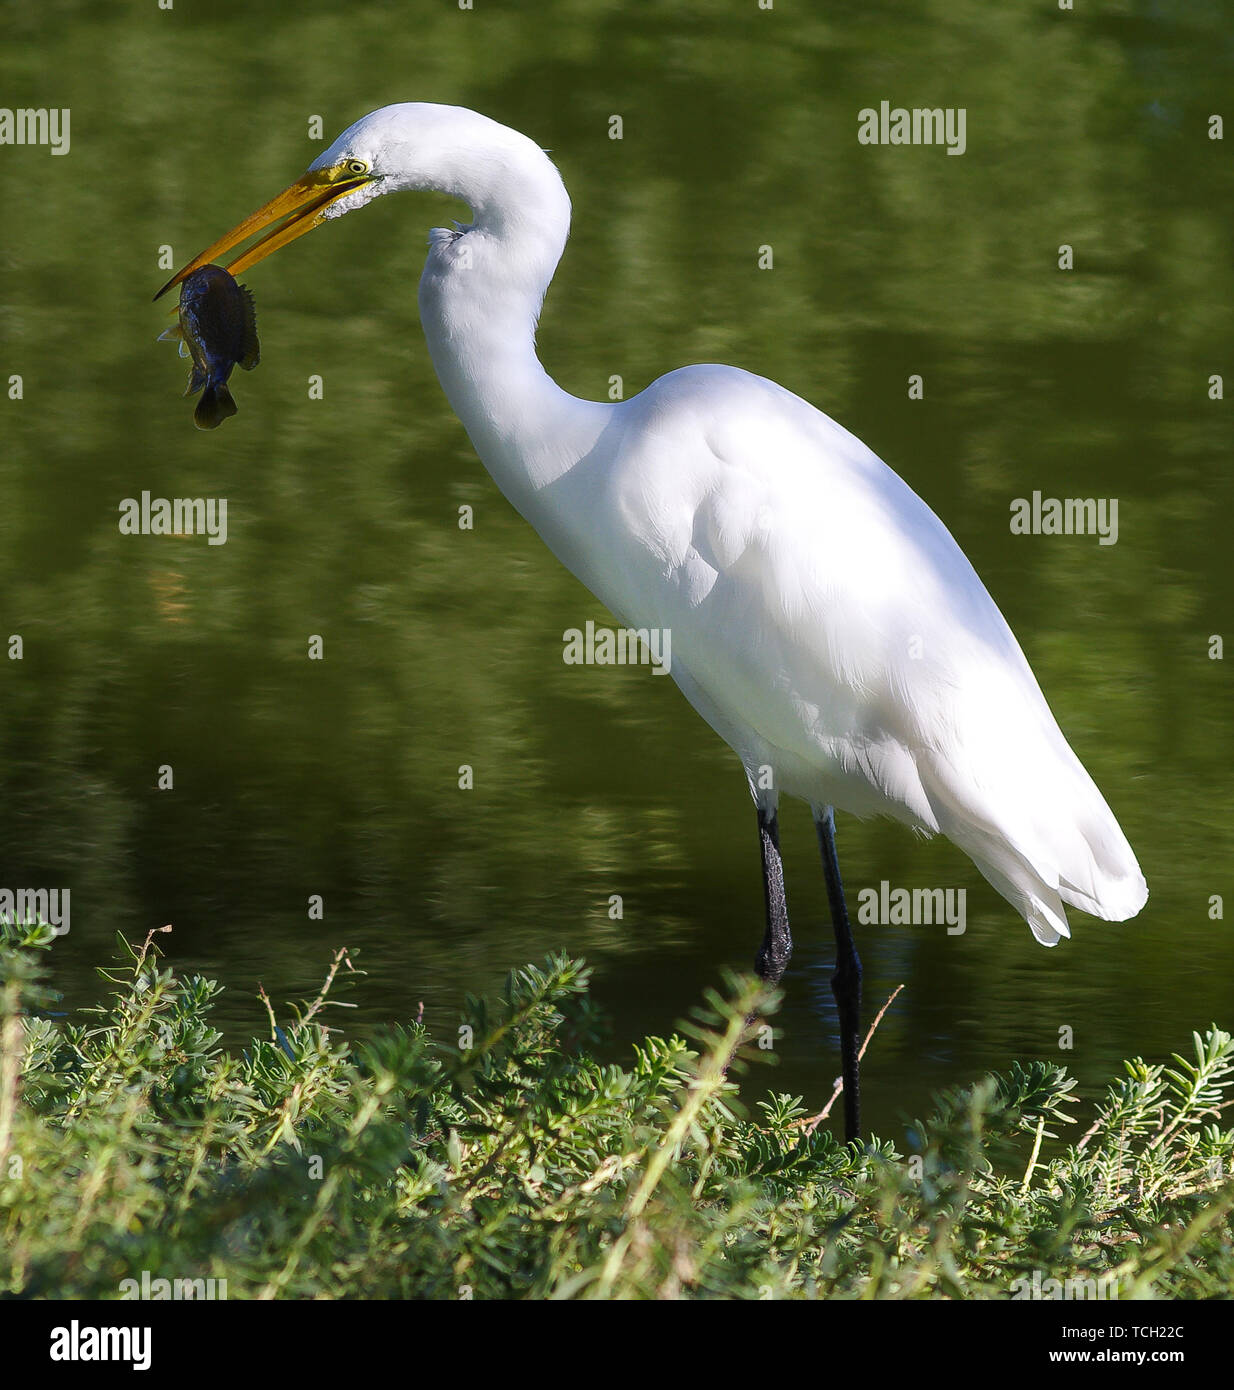 Great egret, egret, fish, food, caught, catching, Stock Photo